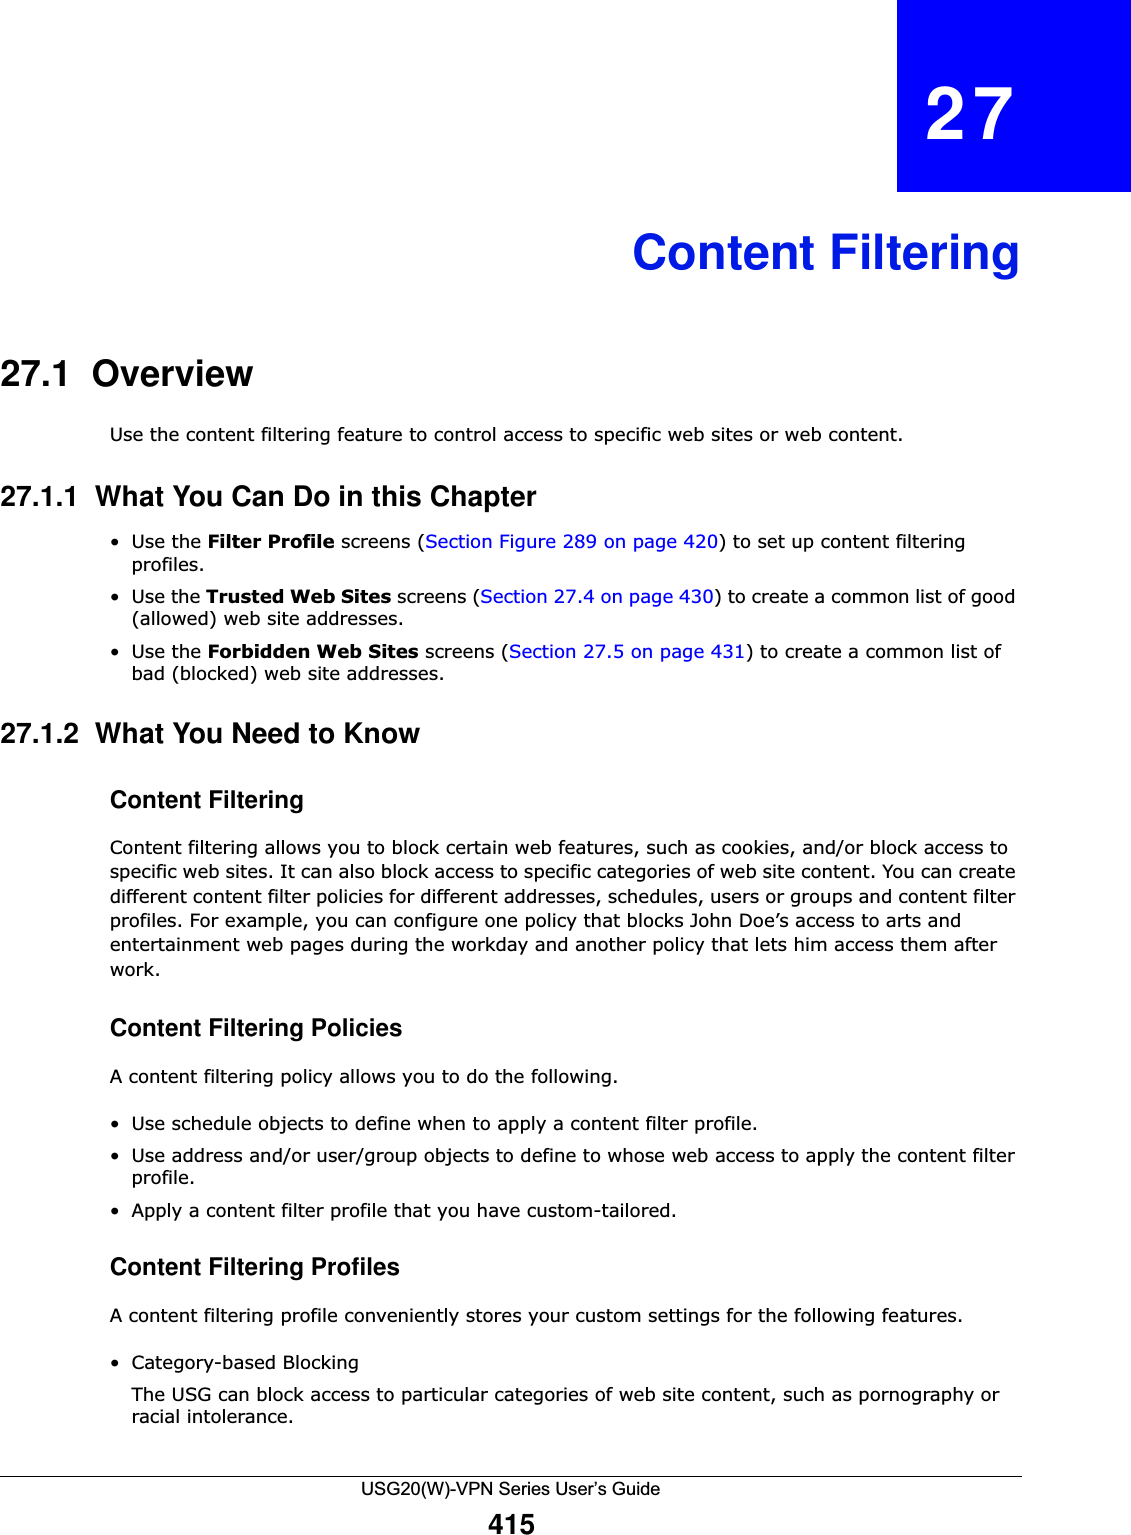 USG20(W)-VPN Series User’s Guide415CHAPTER   27Content Filtering27.1  OverviewUse the content filtering feature to control access to specific web sites or web content. 27.1.1  What You Can Do in this Chapter•Use the Filter Profile screens (Section Figure 289 on page 420) to set up content filtering profiles.•Use the Trusted Web Sites screens (Section 27.4 on page 430) to create a common list of good (allowed) web site addresses.•Use the Forbidden Web Sites screens (Section 27.5 on page 431) to create a common list of bad (blocked) web site addresses.27.1.2  What You Need to KnowContent FilteringContent filtering allows you to block certain web features, such as cookies, and/or block access to specific web sites. It can also block access to specific categories of web site content. You can create different content filter policies for different addresses, schedules, users or groups and content filter profiles. For example, you can configure one policy that blocks John Doe’s access to arts and entertainment web pages during the workday and another policy that lets him access them after work.Content Filtering PoliciesA content filtering policy allows you to do the following.• Use schedule objects to define when to apply a content filter profile.• Use address and/or user/group objects to define to whose web access to apply the content filter profile.• Apply a content filter profile that you have custom-tailored. Content Filtering ProfilesA content filtering profile conveniently stores your custom settings for the following features.• Category-based BlockingThe USG can block access to particular categories of web site content, such as pornography or racial intolerance.